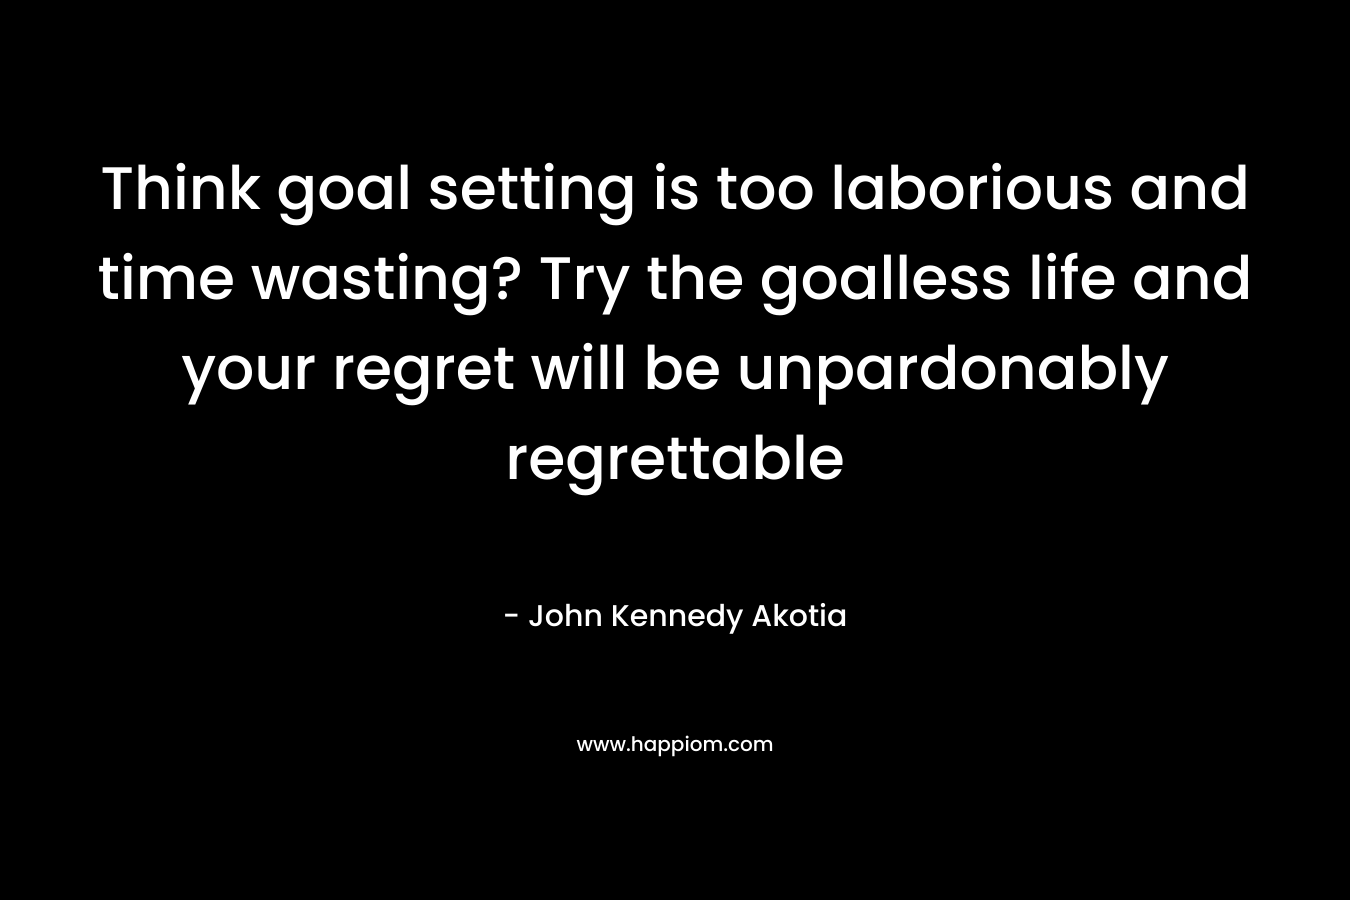 Think goal setting is too laborious and time wasting? Try the goalless life and your regret will be unpardonably regrettable – John Kennedy Akotia